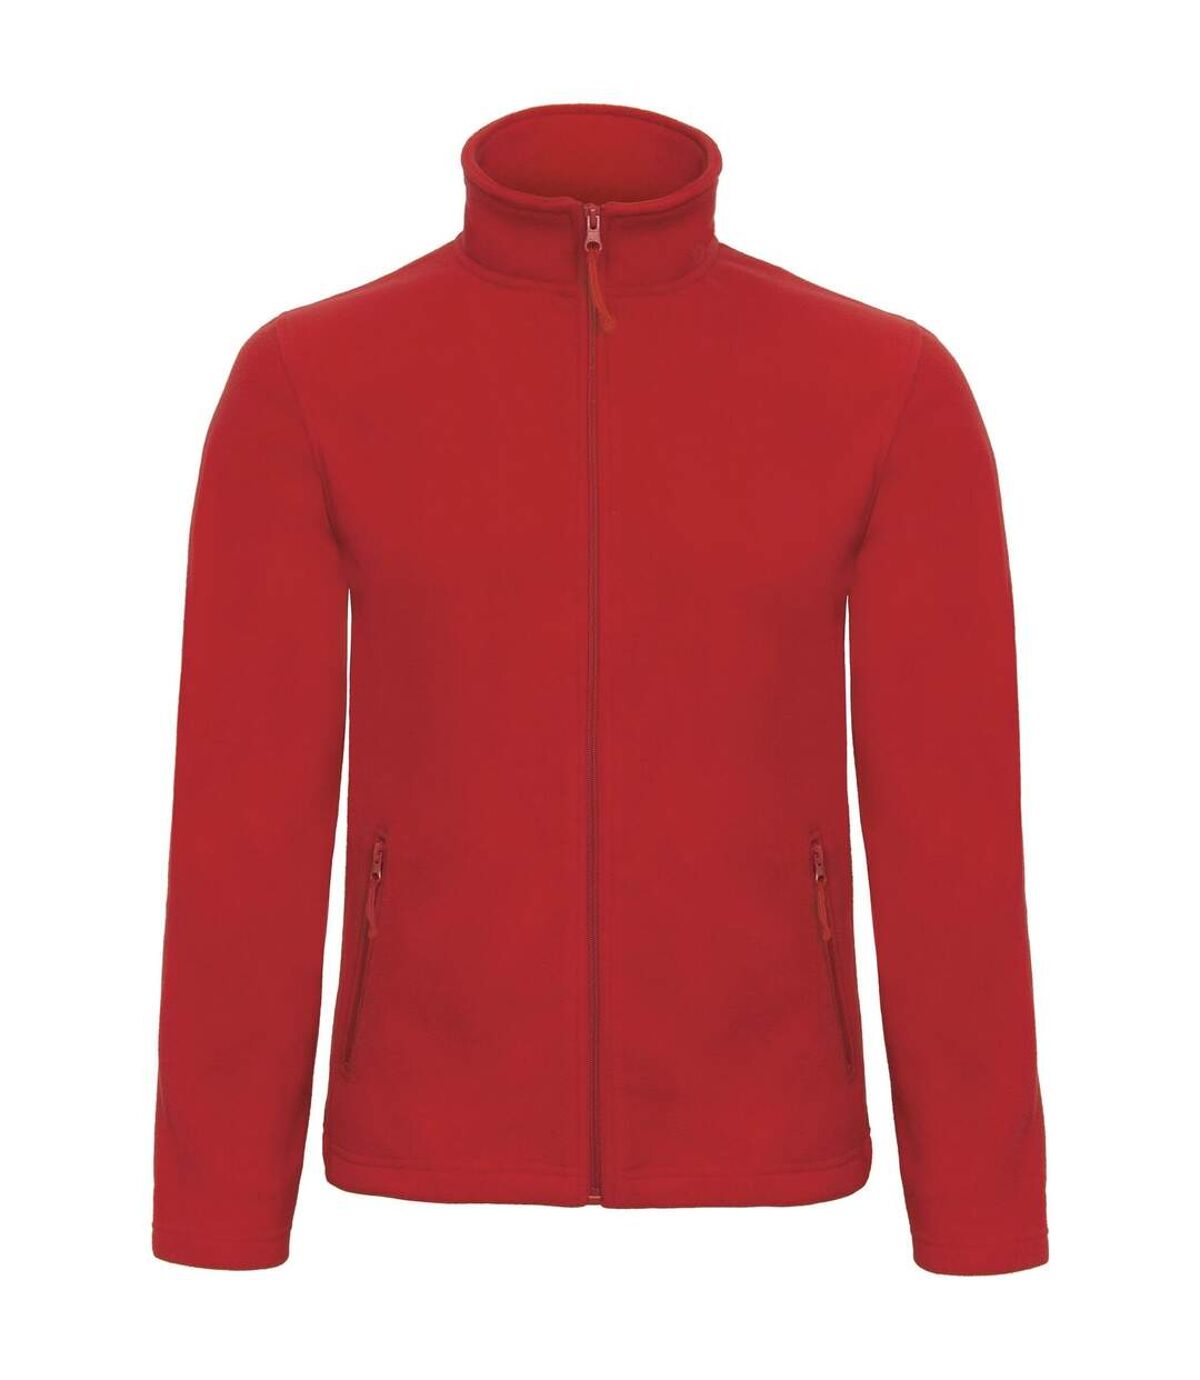 B&C Collection Mens ID 501 Microfleece Jacket (Red)